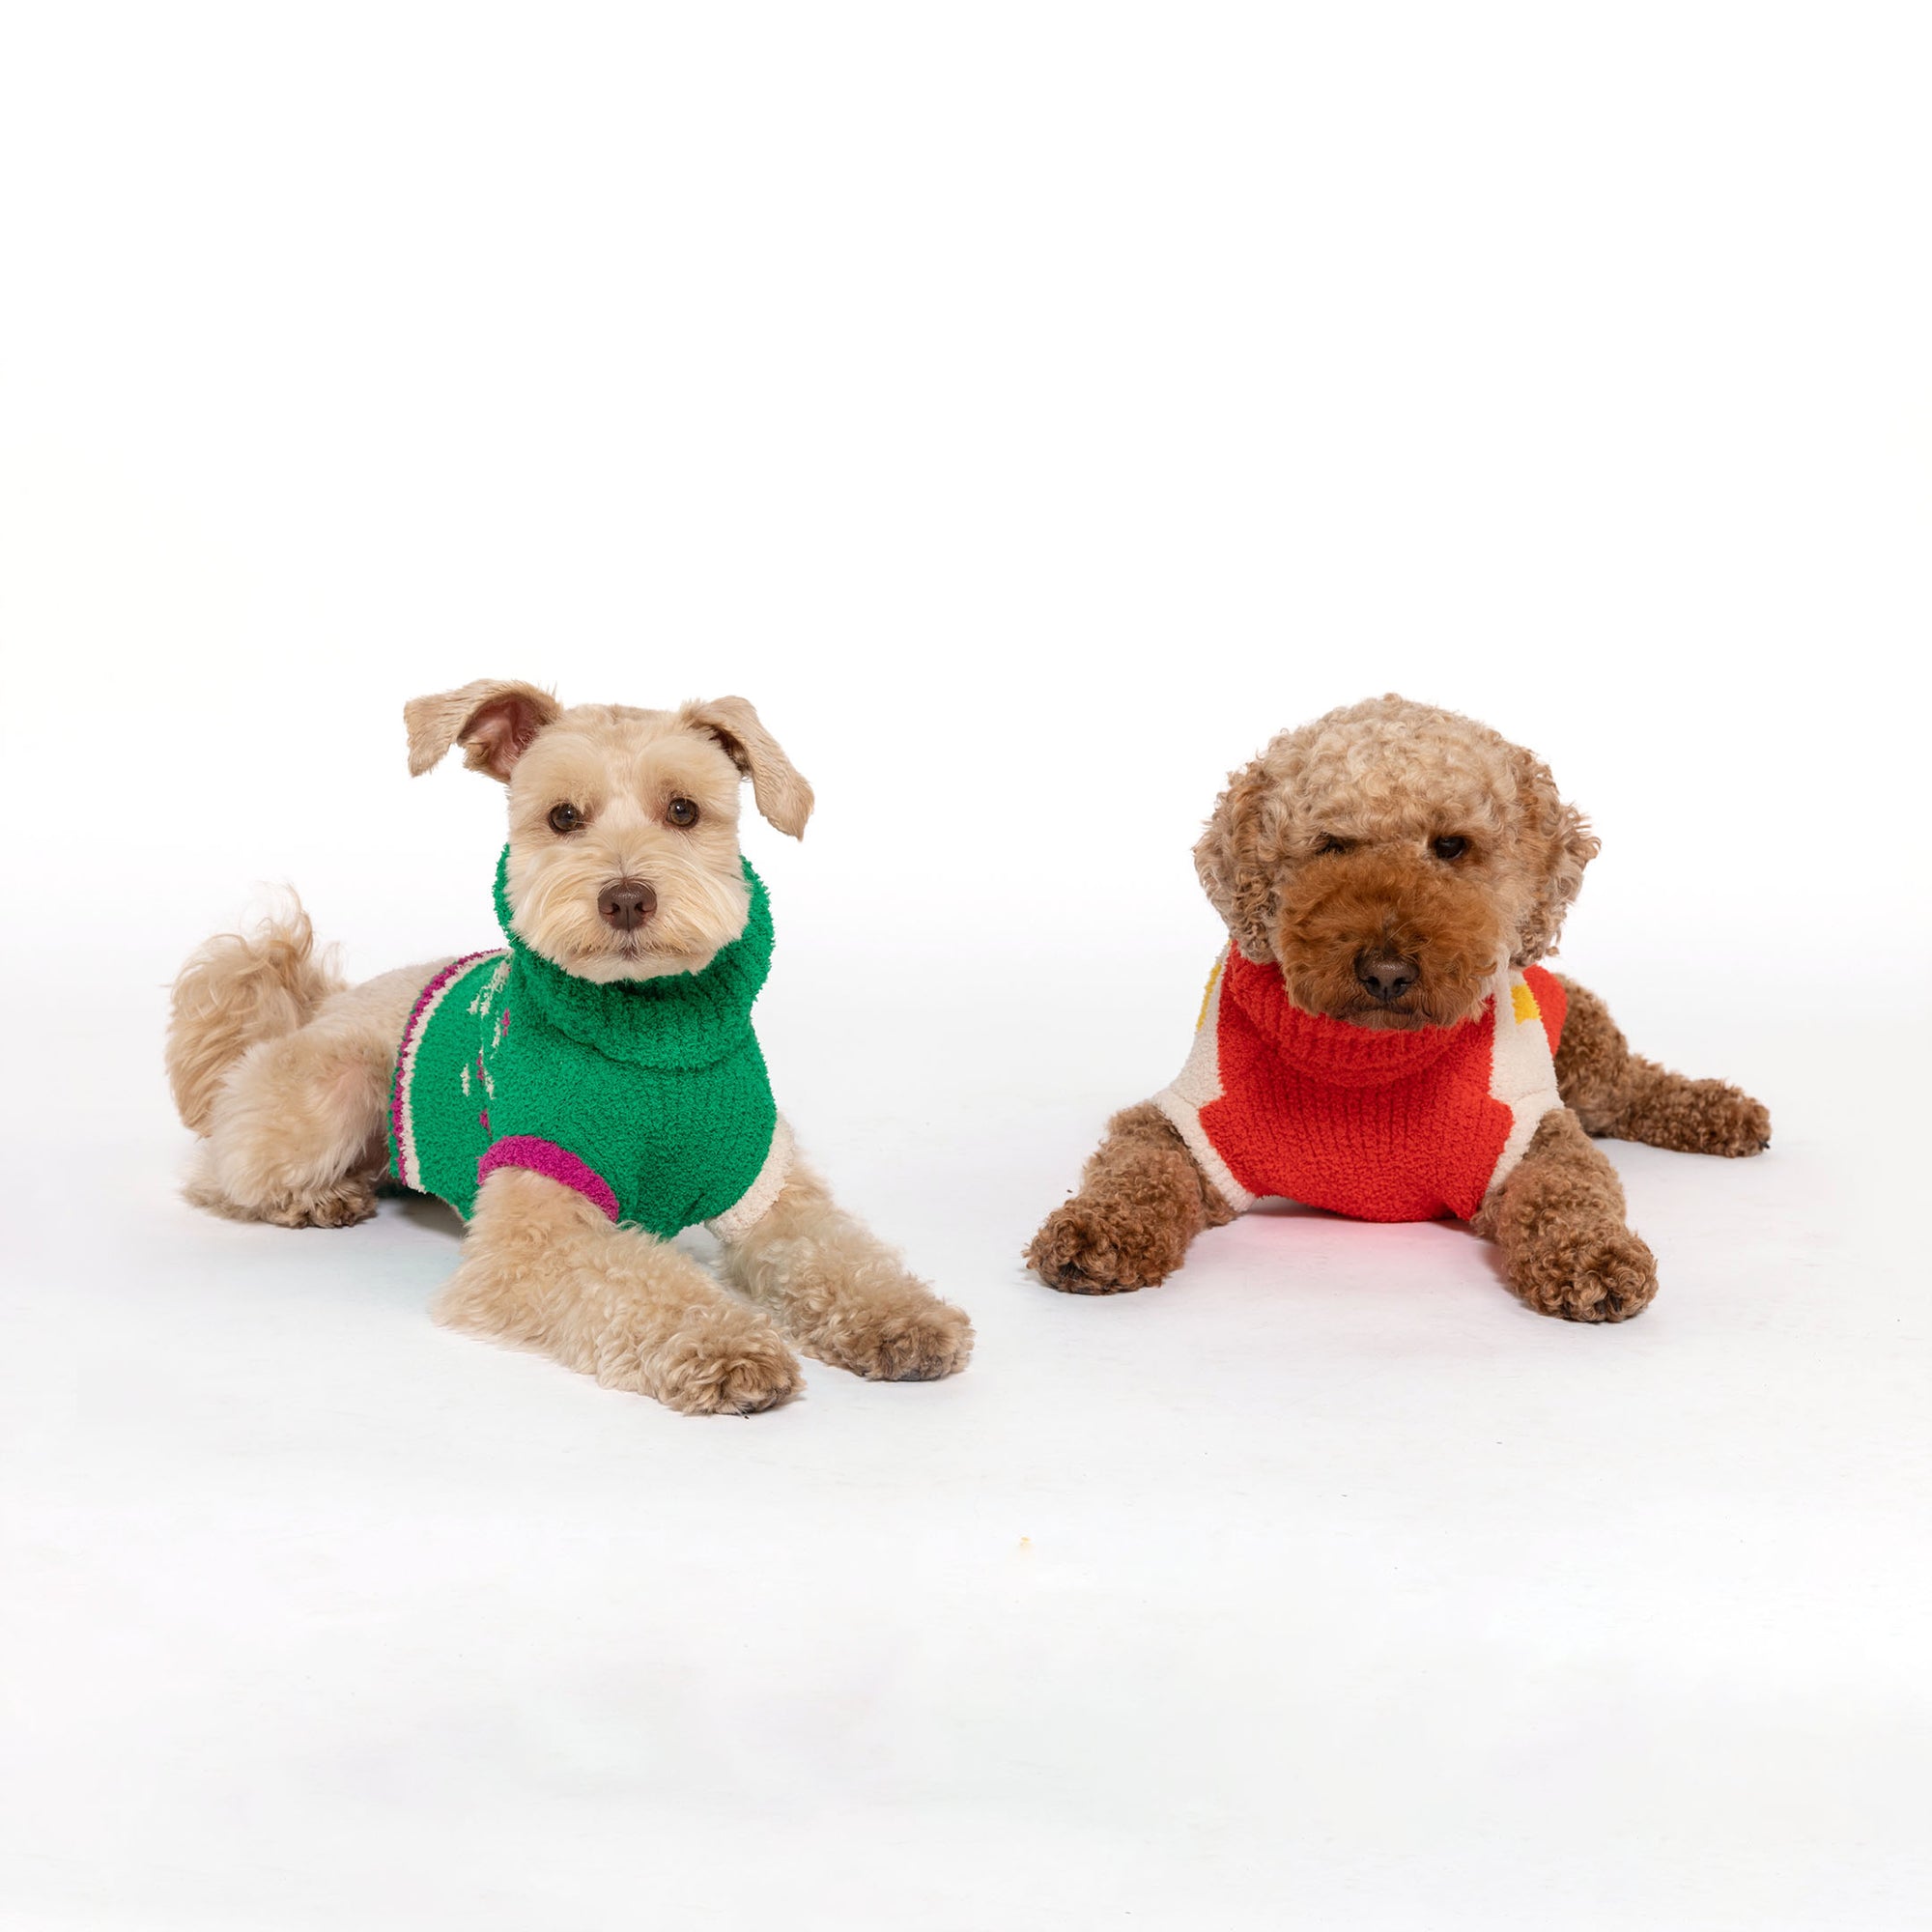  Two charming dogs are showcased, one in a vibrant green sweater with festive accents and the other in a cozy red and yellow sweater, reflecting the joyful spirit of The Furryfolks brand.